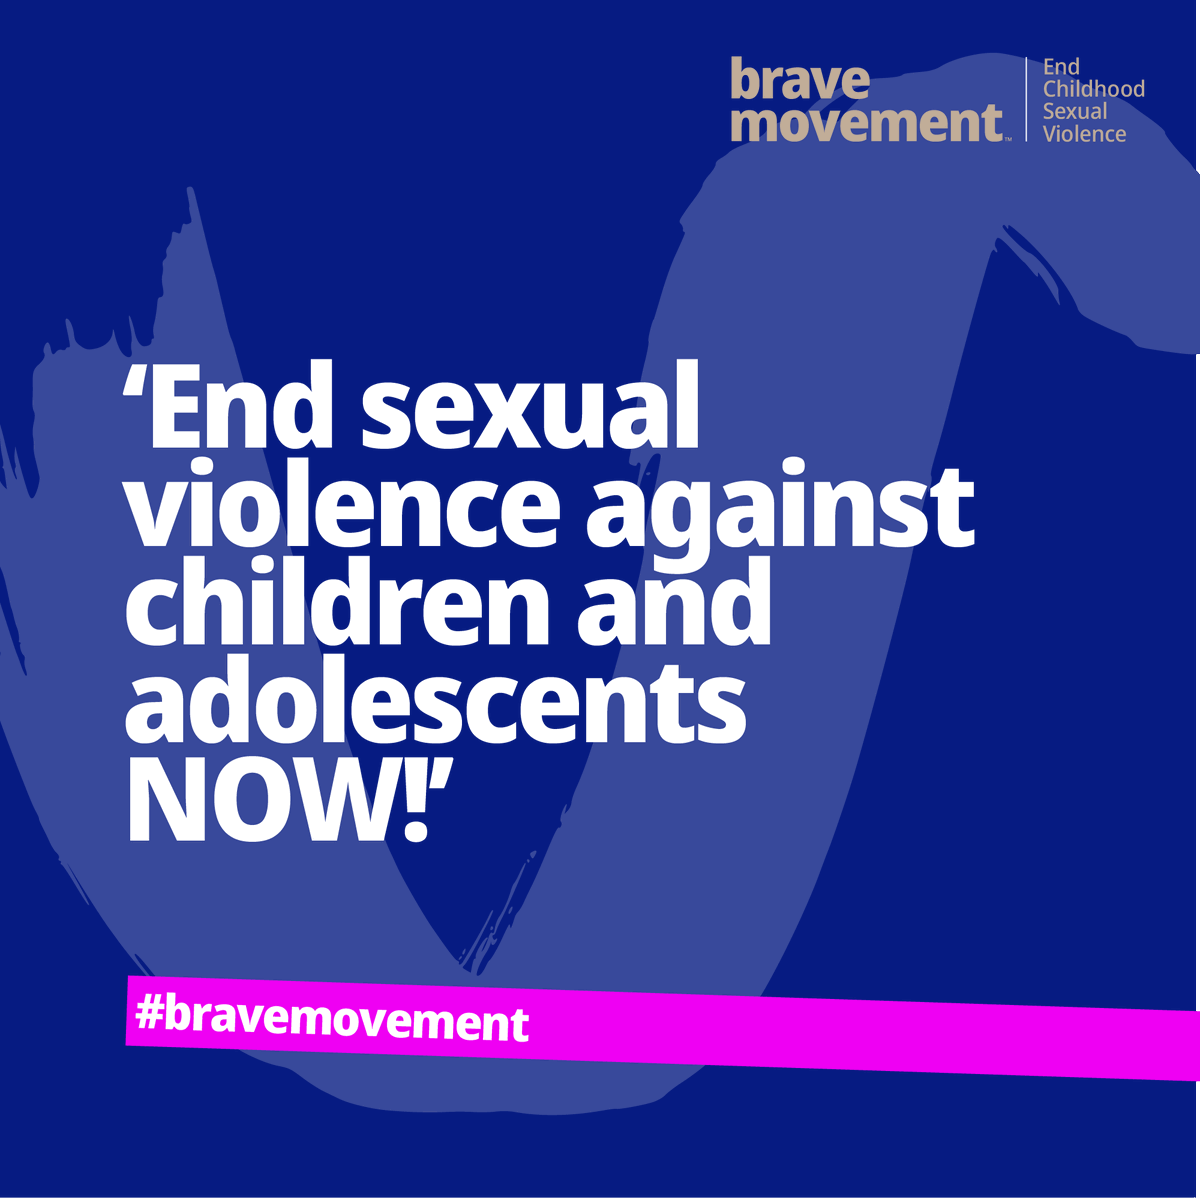 The #BraveMovement launches today! We’re proud to be joining their fight for children who can’t fight for themselves. We’ll keep demanding change until we #EndChildSexualAbuse everywhere. Follow @bebraveglobal to join the movement!